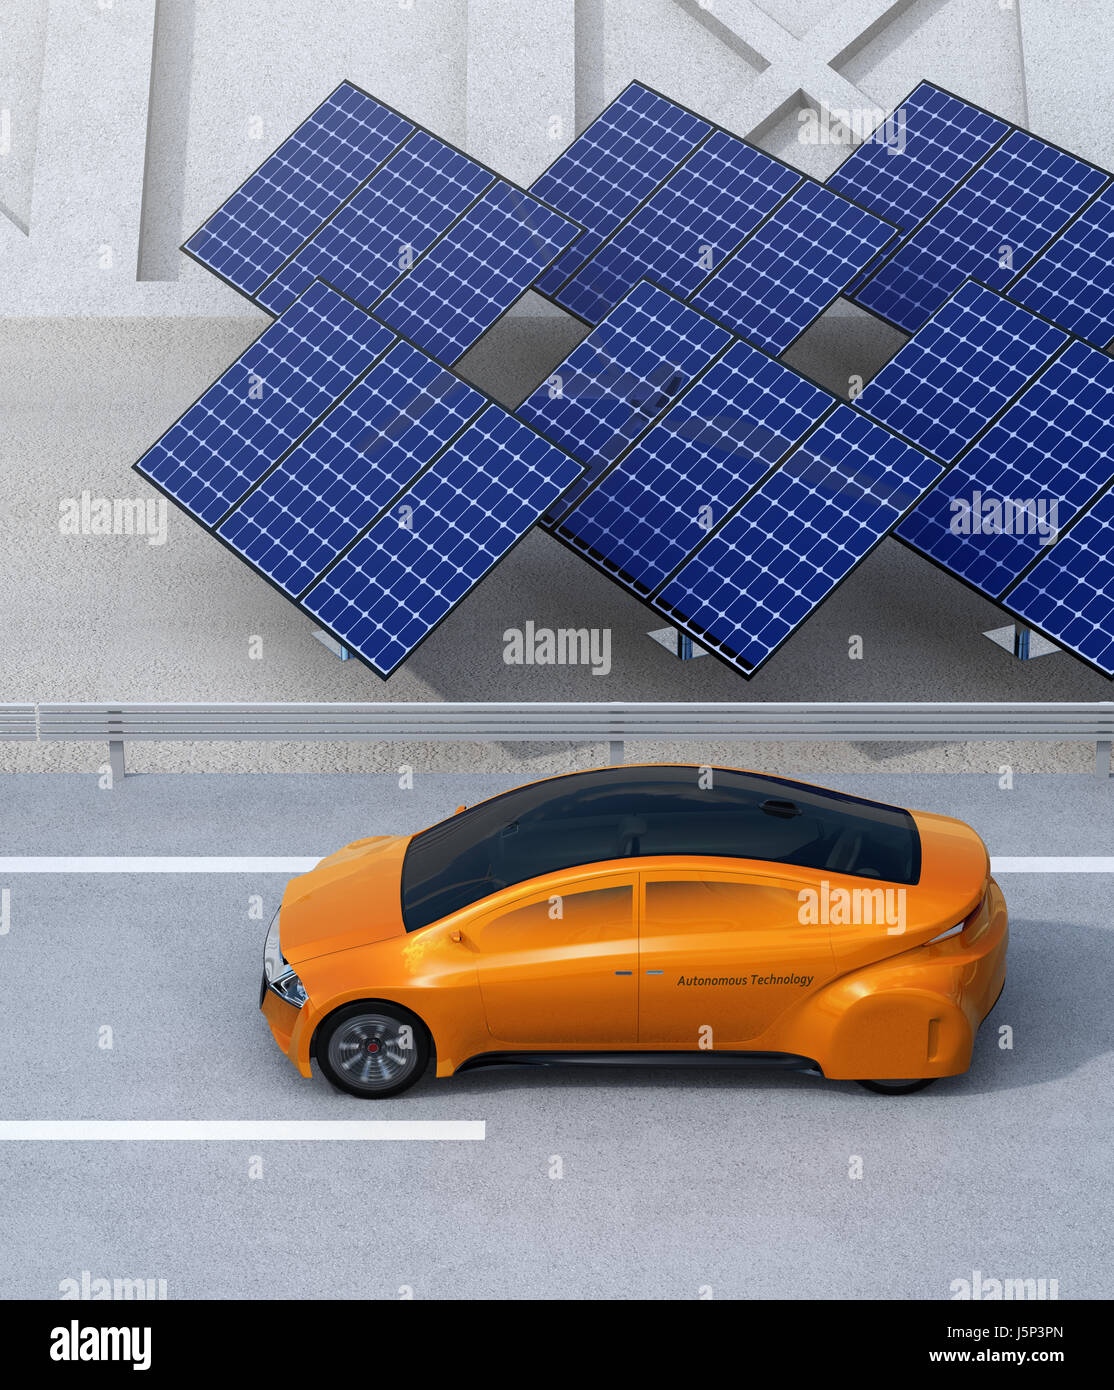 Orange electric car driving on the highway.  Solar panel station on the roadside. 3D rendering image. Stock Photo